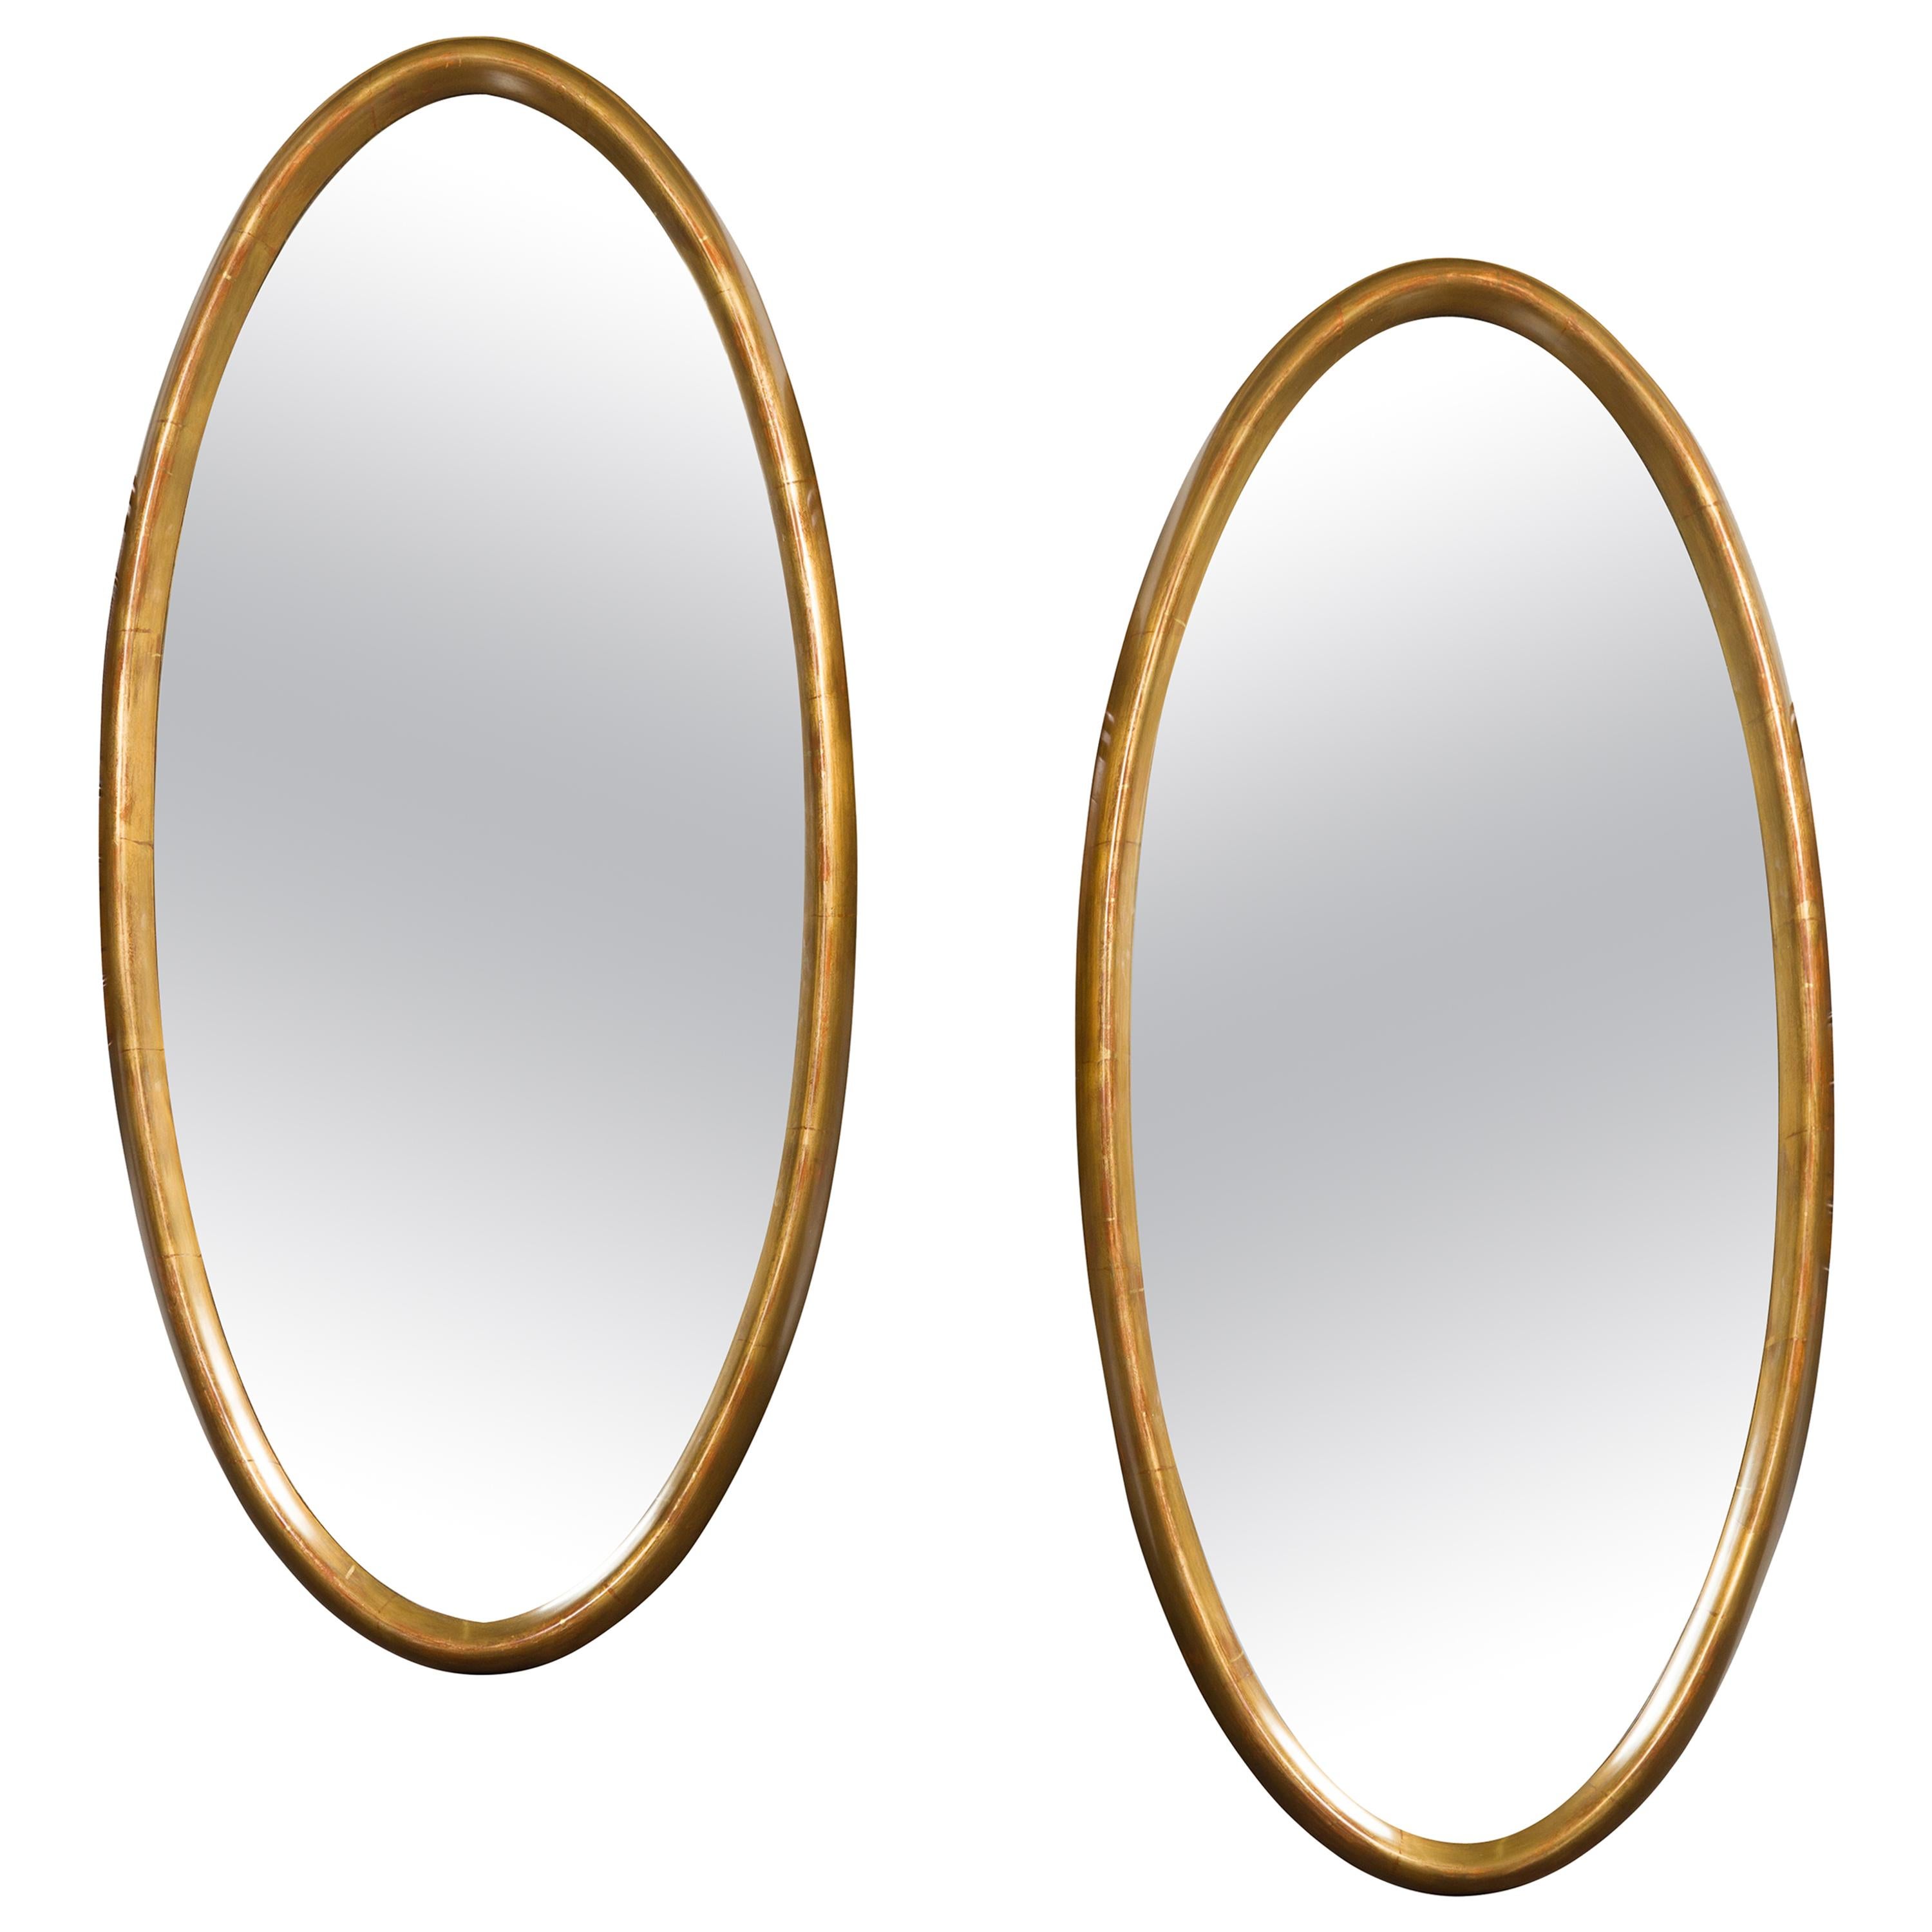 Pair of Vintage Italian Midcentury Tall Giltwood Oval Mirrors with Clean Lines